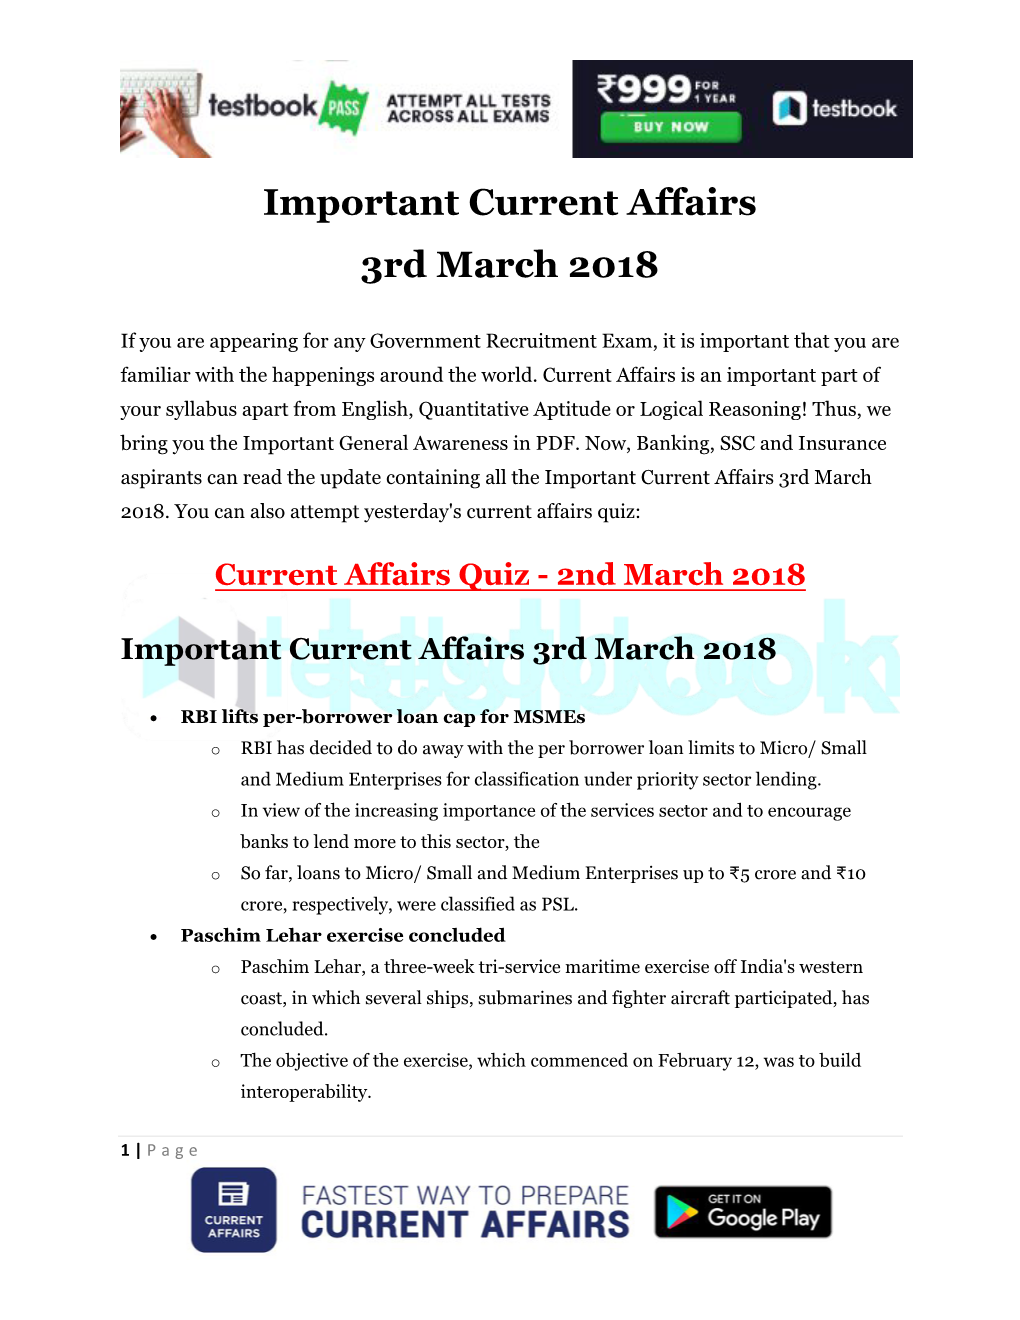 Important Current Affairs 3Rd March 2018